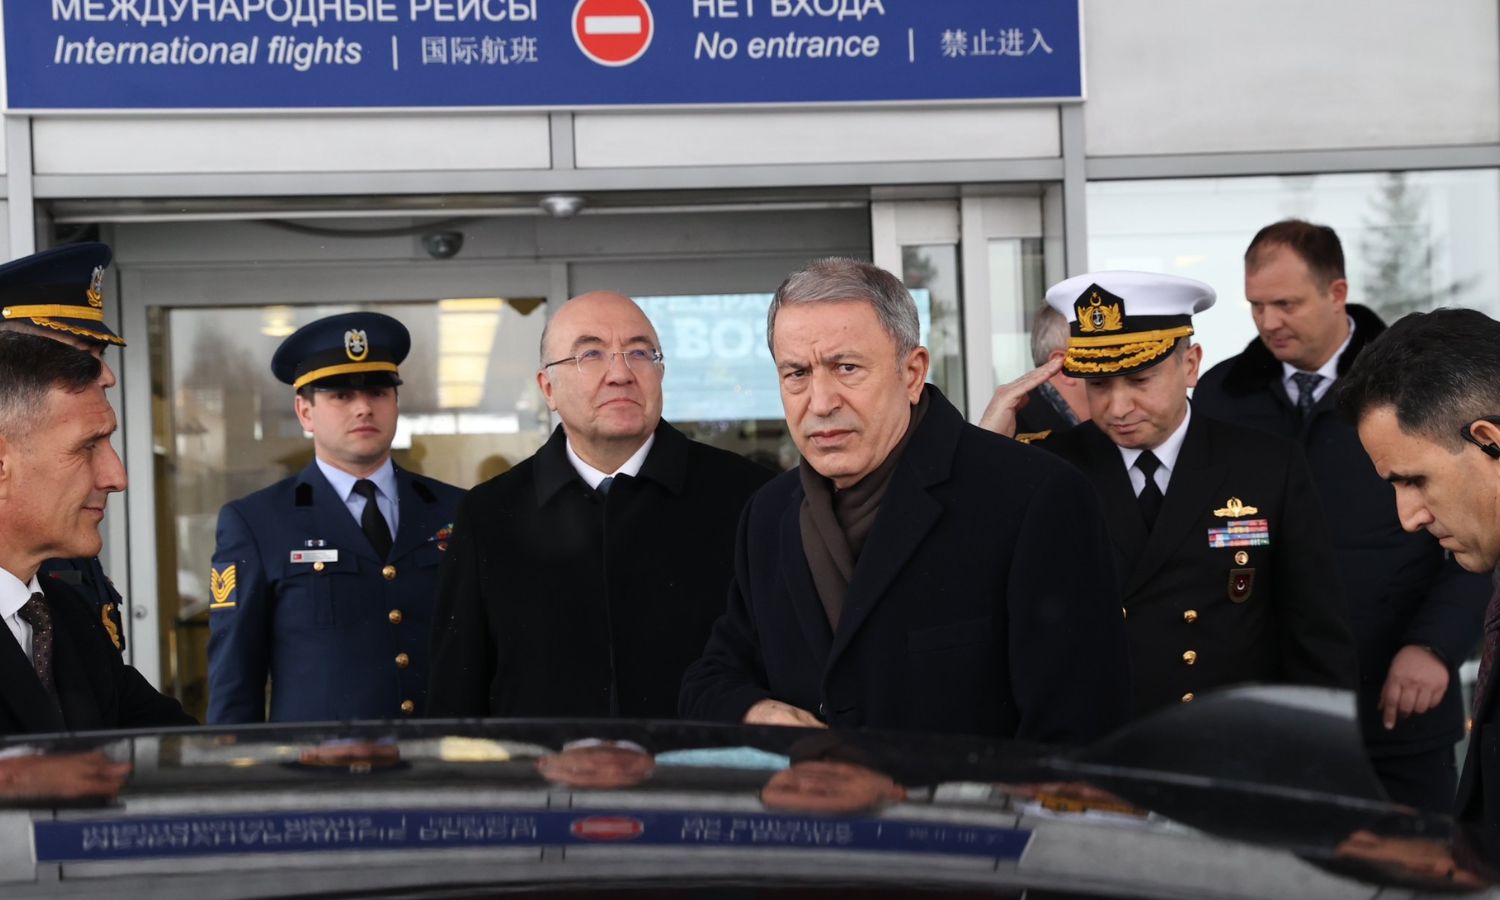 Turkish Defense Minister Hulusi Akar in Moscow to participate in the tripartite ministerial meeting with Russia and the Syrian regime - 28 December 2022 (Turkish Defense Ministry)